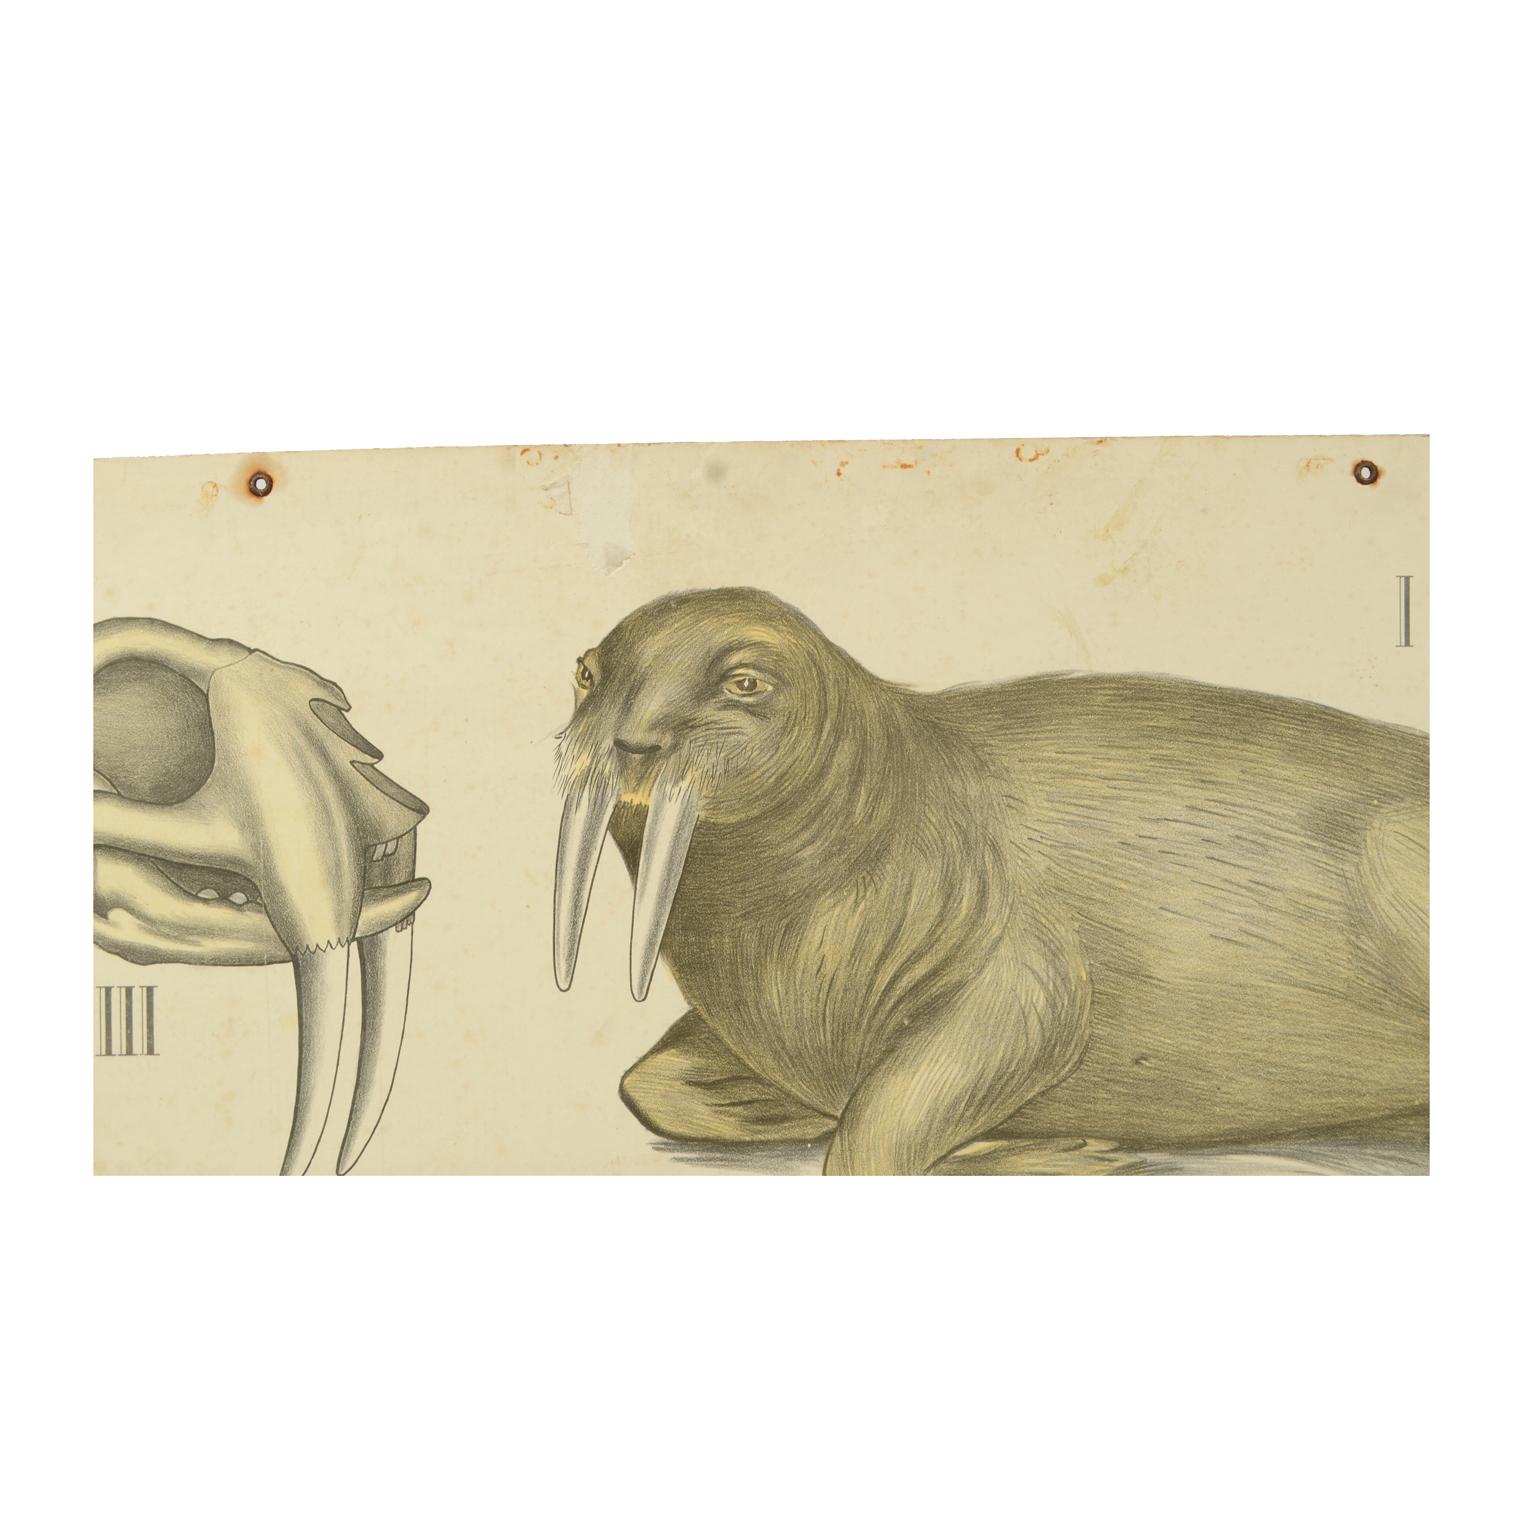 Zoological didactic plate n. 21 lithograph on cardboard made in 1912 depicting water predators. Dybdhals Zoologiske Plancher P.M.Bye & Co Oslo. Made by H Aschehoug & Co. Good condition. Measures: 74.3 x 60 cm. - inche 29.2x23.6.
H. Aschehoug & Co.